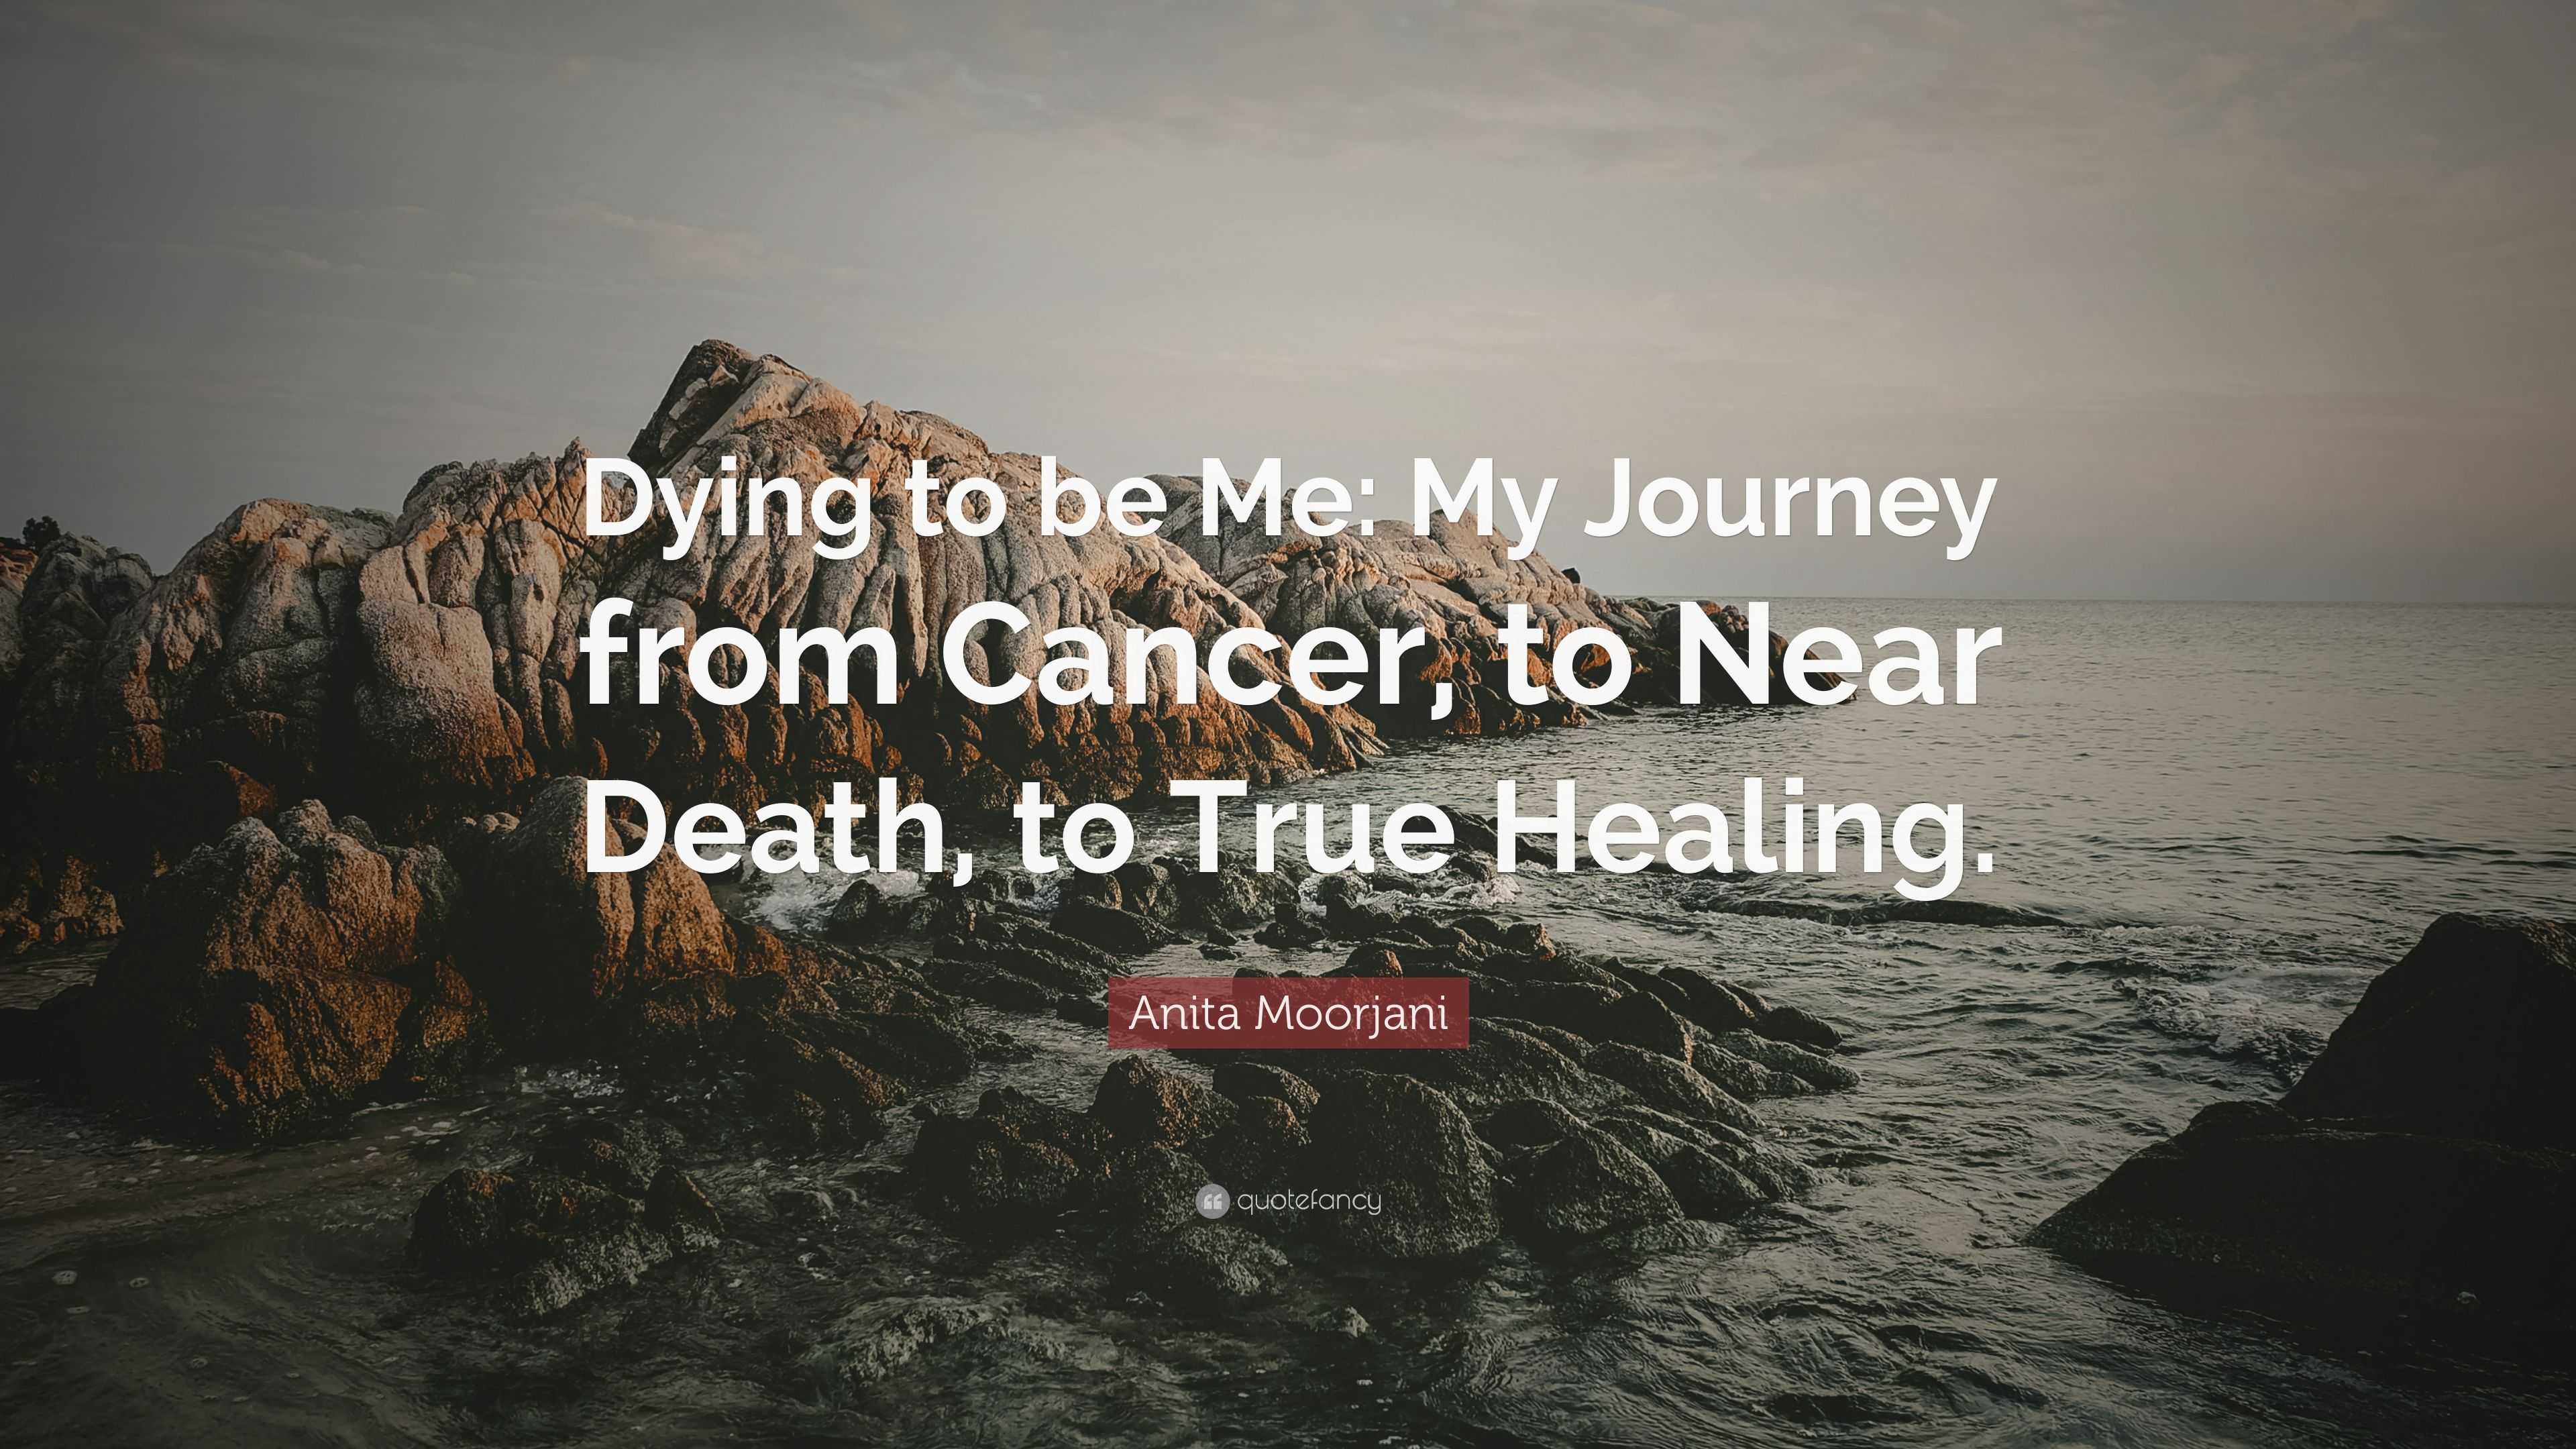 Dying to Be Me: My Journey from Cancer, to Near Death, to True Healing